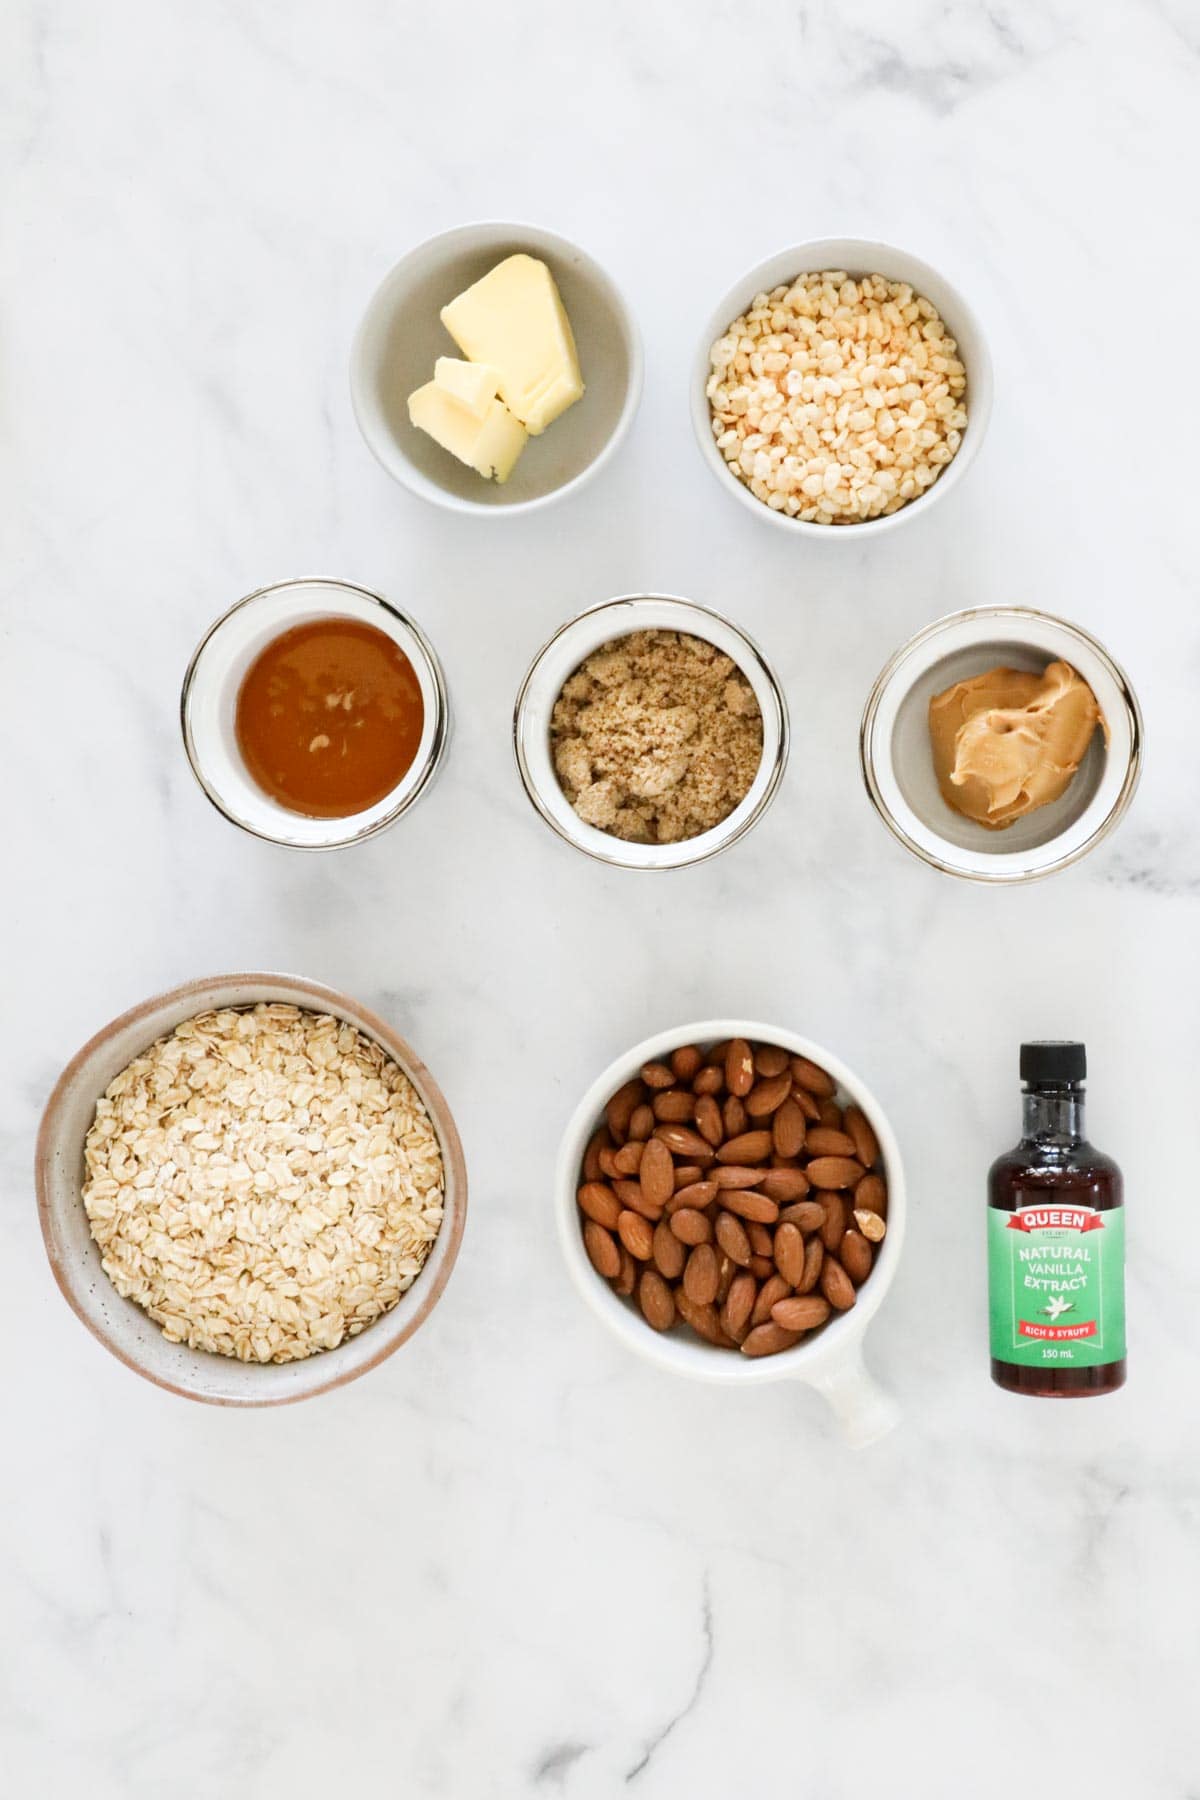 The ingredients for an oat almond honey slice.